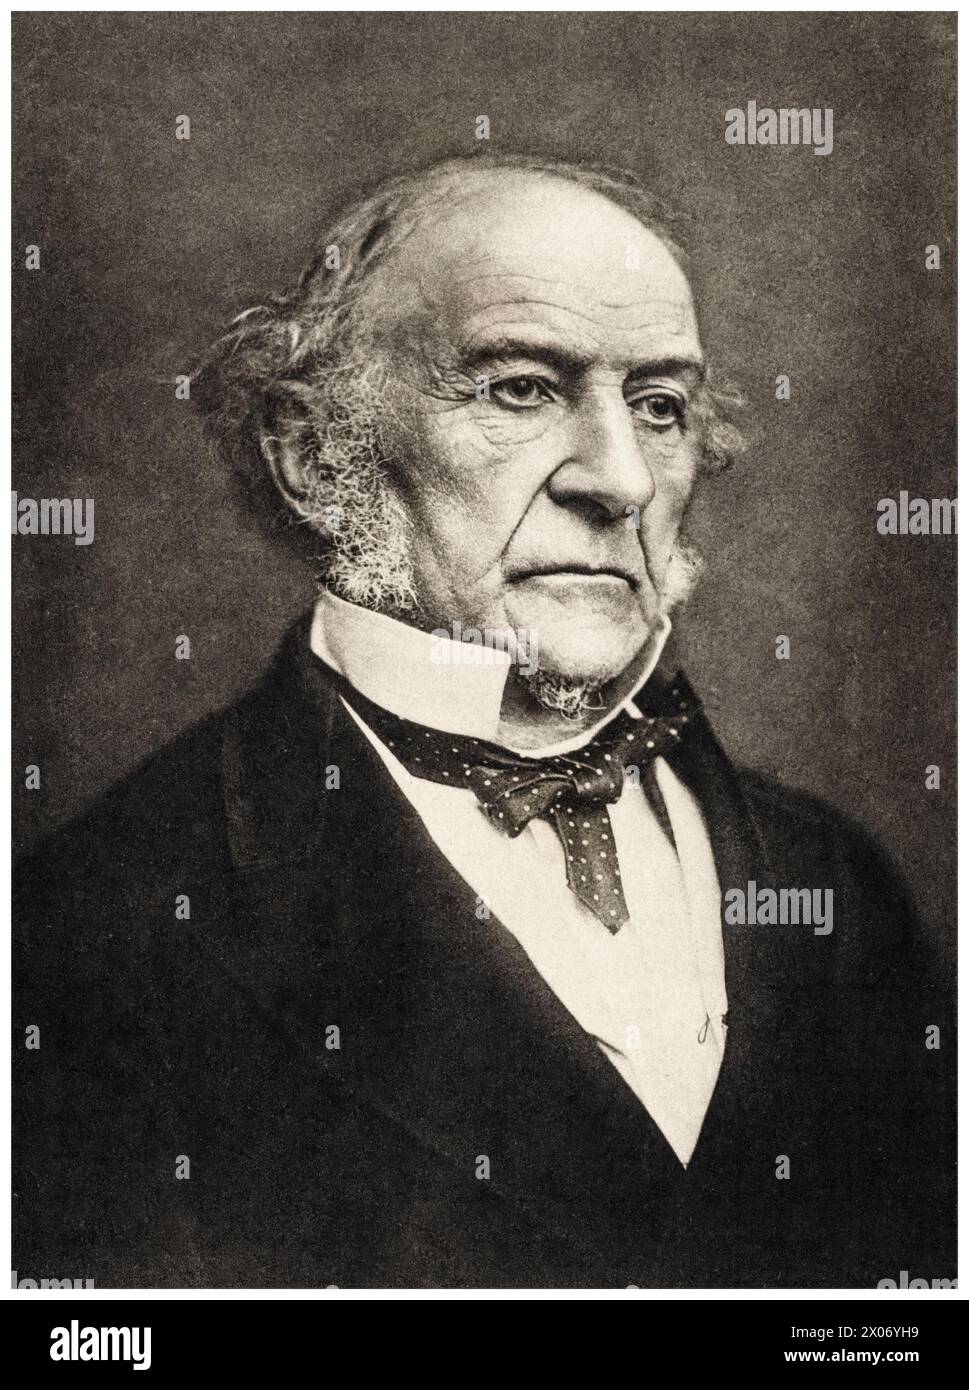 William Gladstone (William Ewart Gladstone, 1809-1898), Liberal politician and four times Prime Minister of the United Kingdom 1868-1874, 1880-1885, Feb-Jul 1886, and 1892-1894, portrait photograph by Samuel Alexander Walker, 1892 Stock Photo